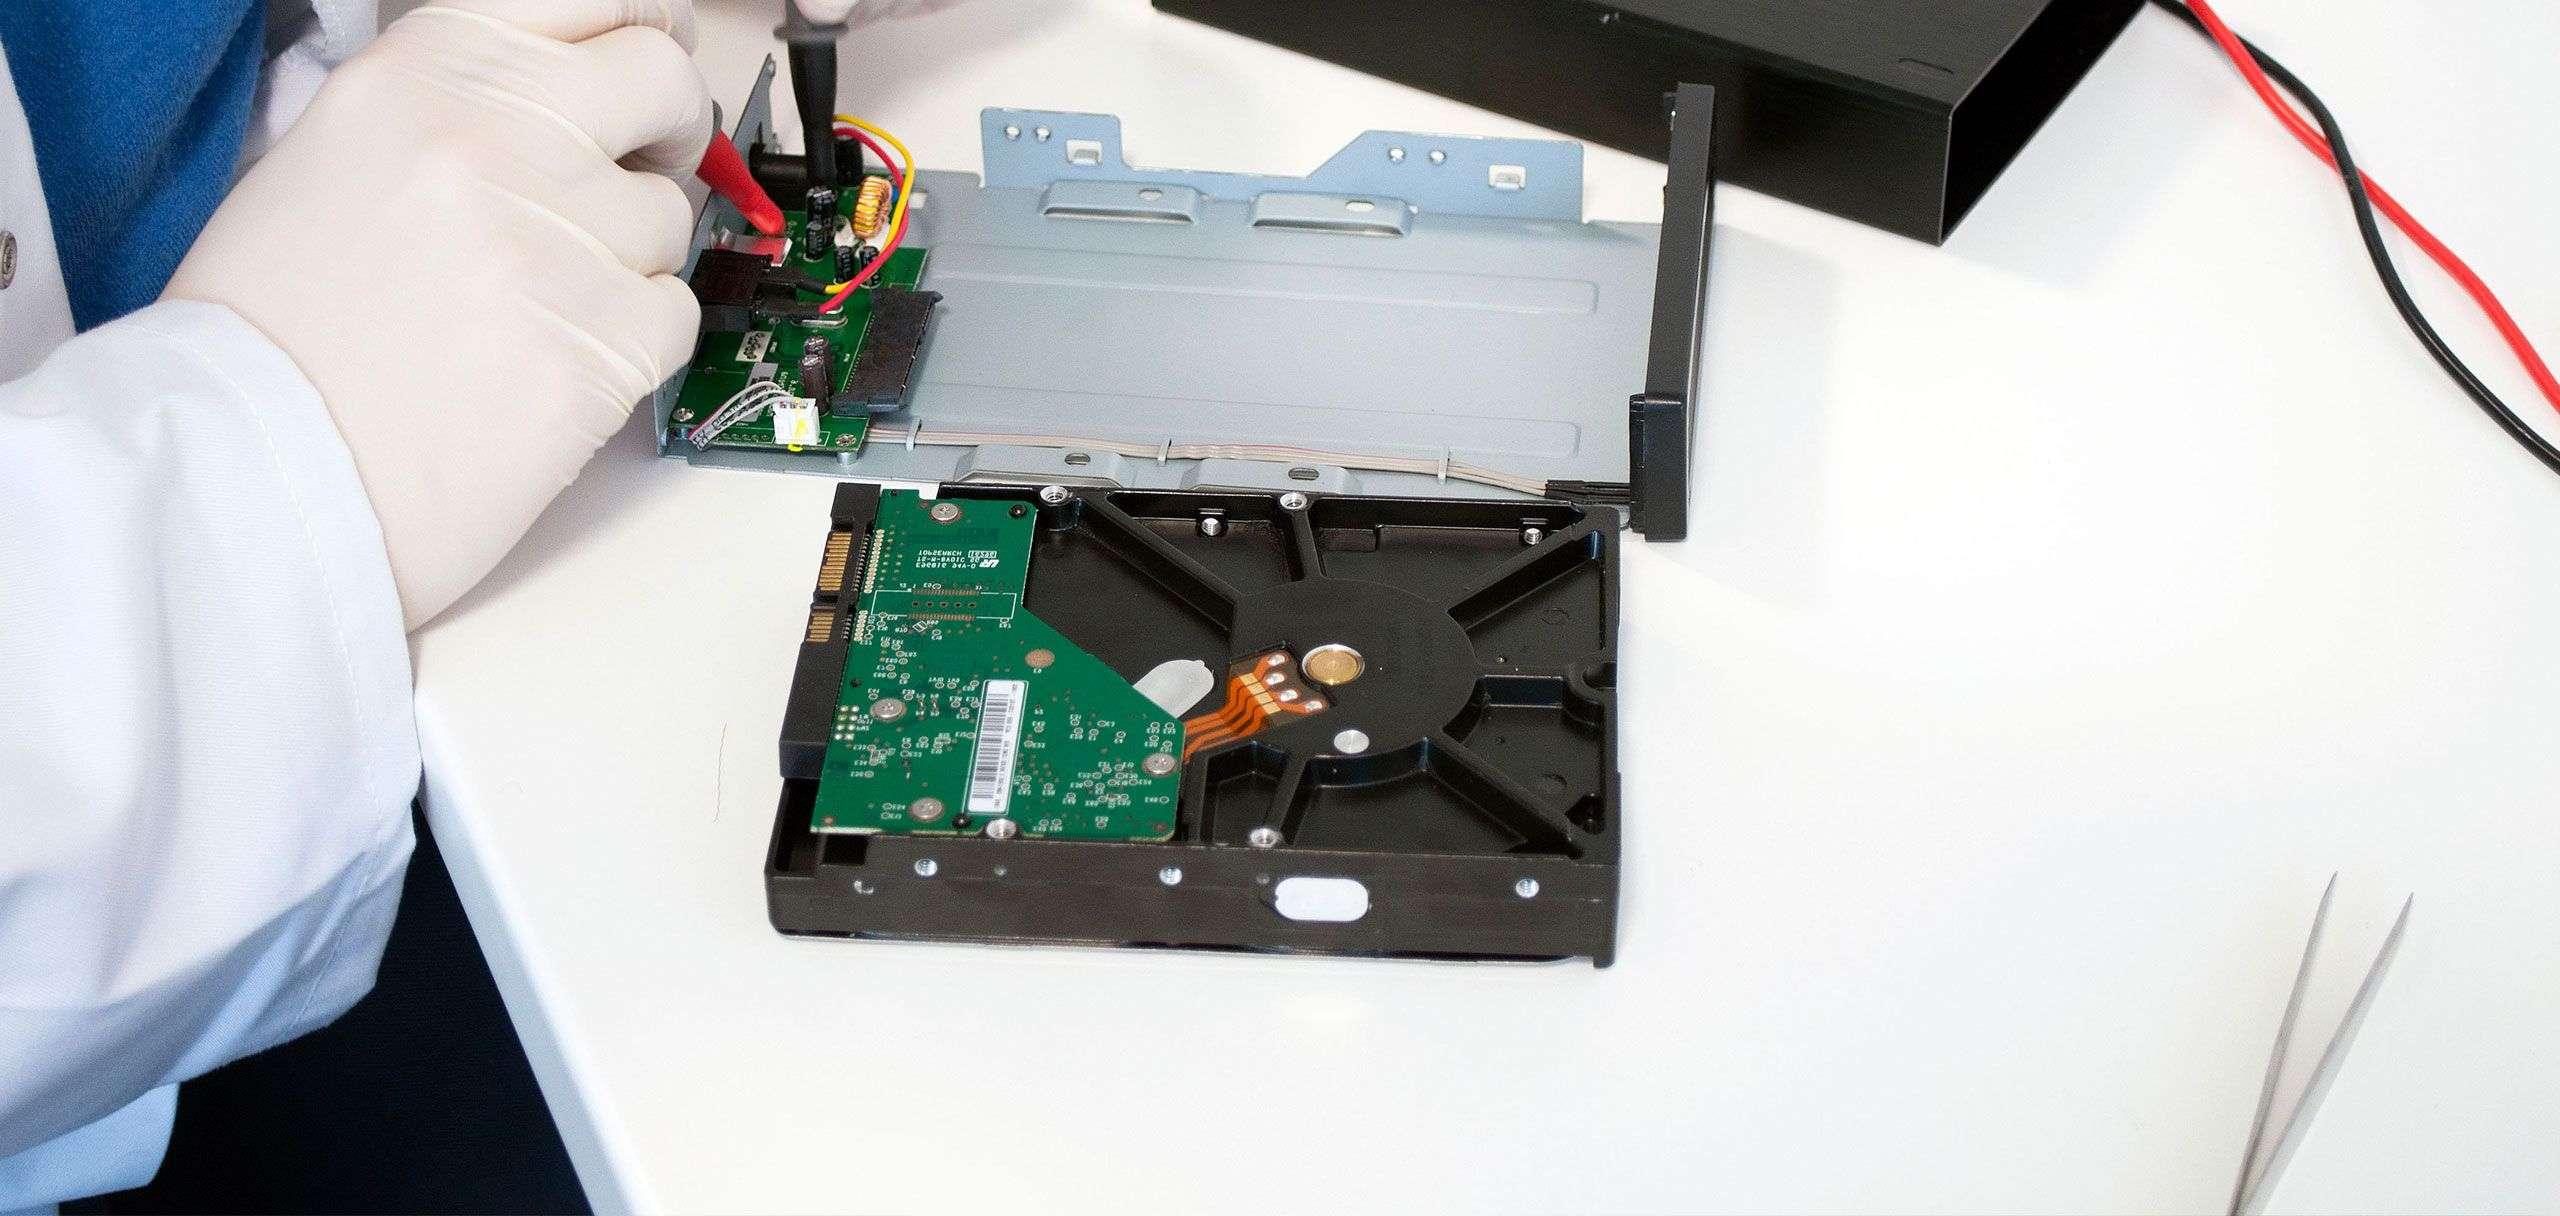 EXTERNAL HDD DATA RECOVERY